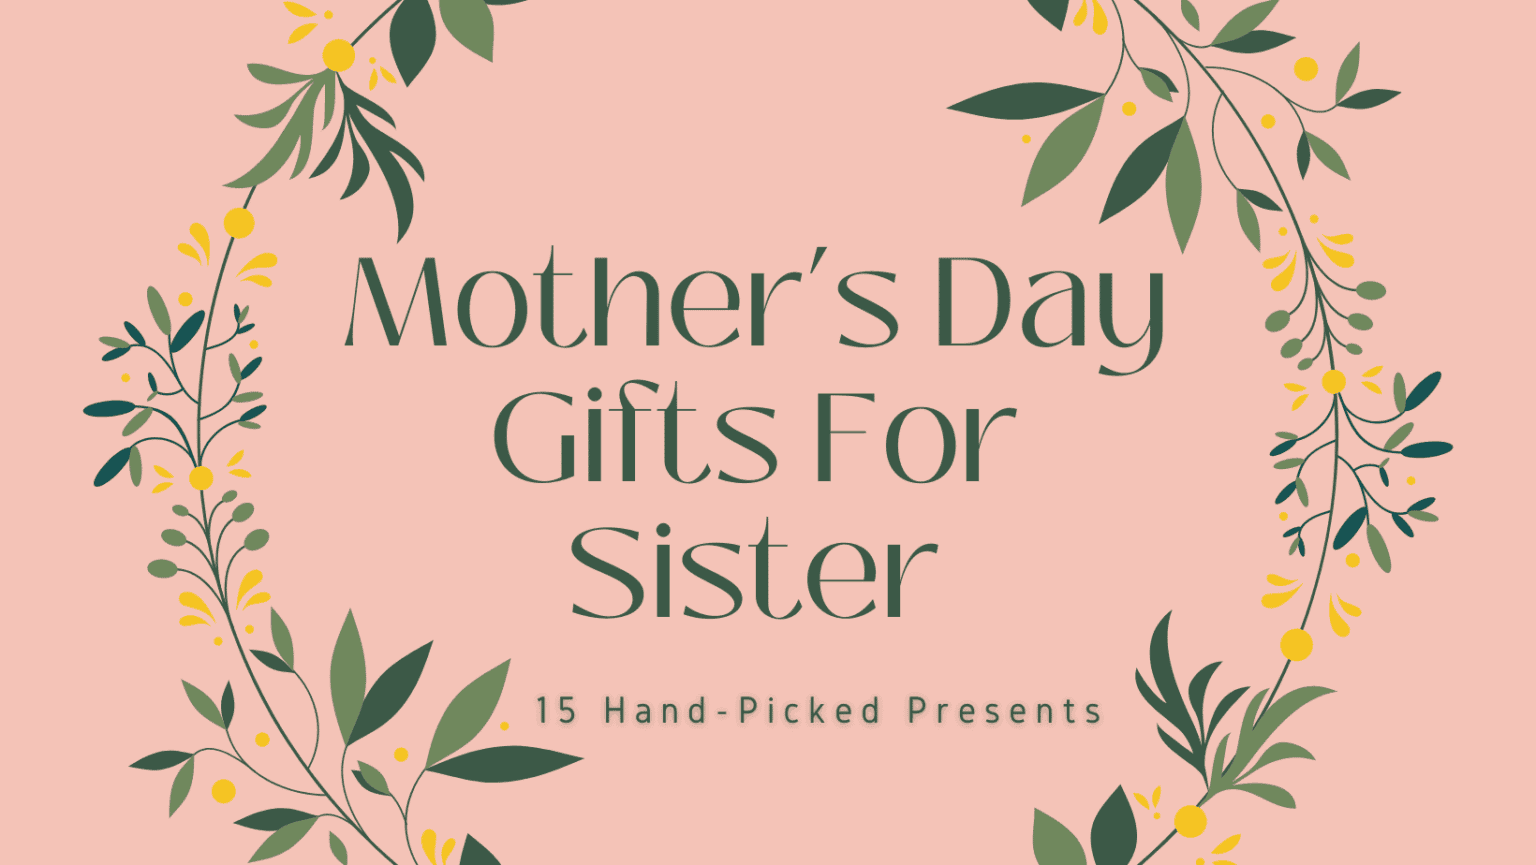 Mother's Day Gifts for Sister - Cover Image